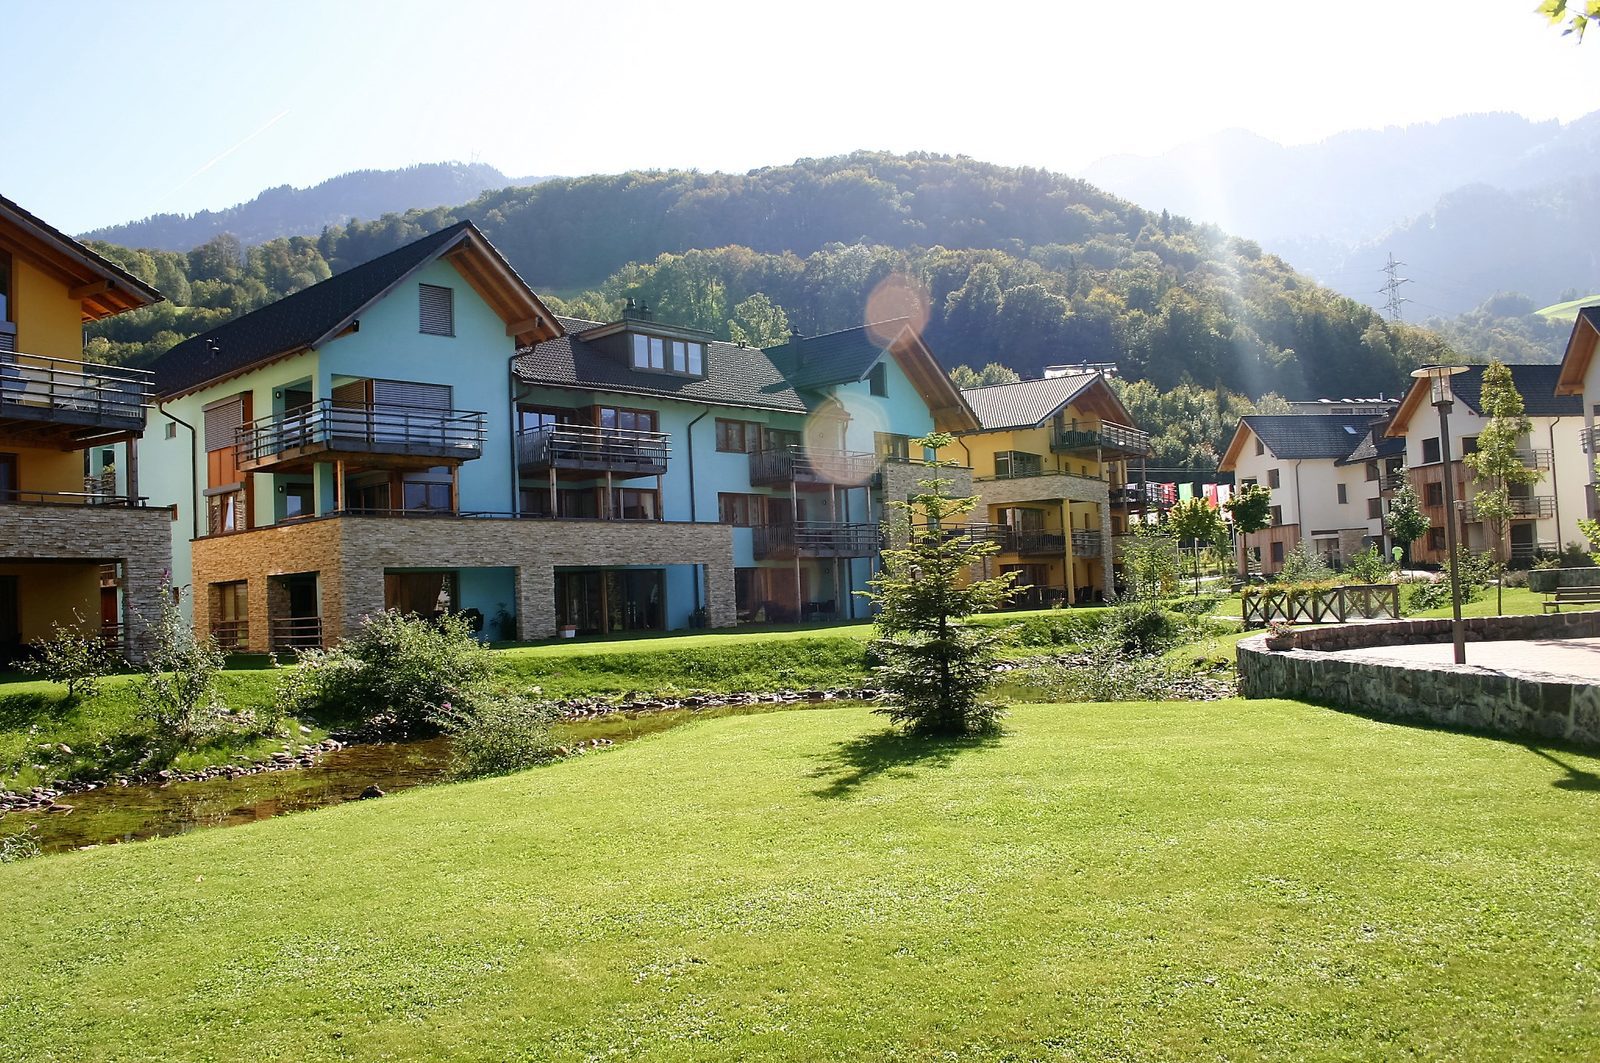 Holiday homes along the little stream of Resort Walensee in Heidiland Flumserberg Switzerland, during the Easter holidays